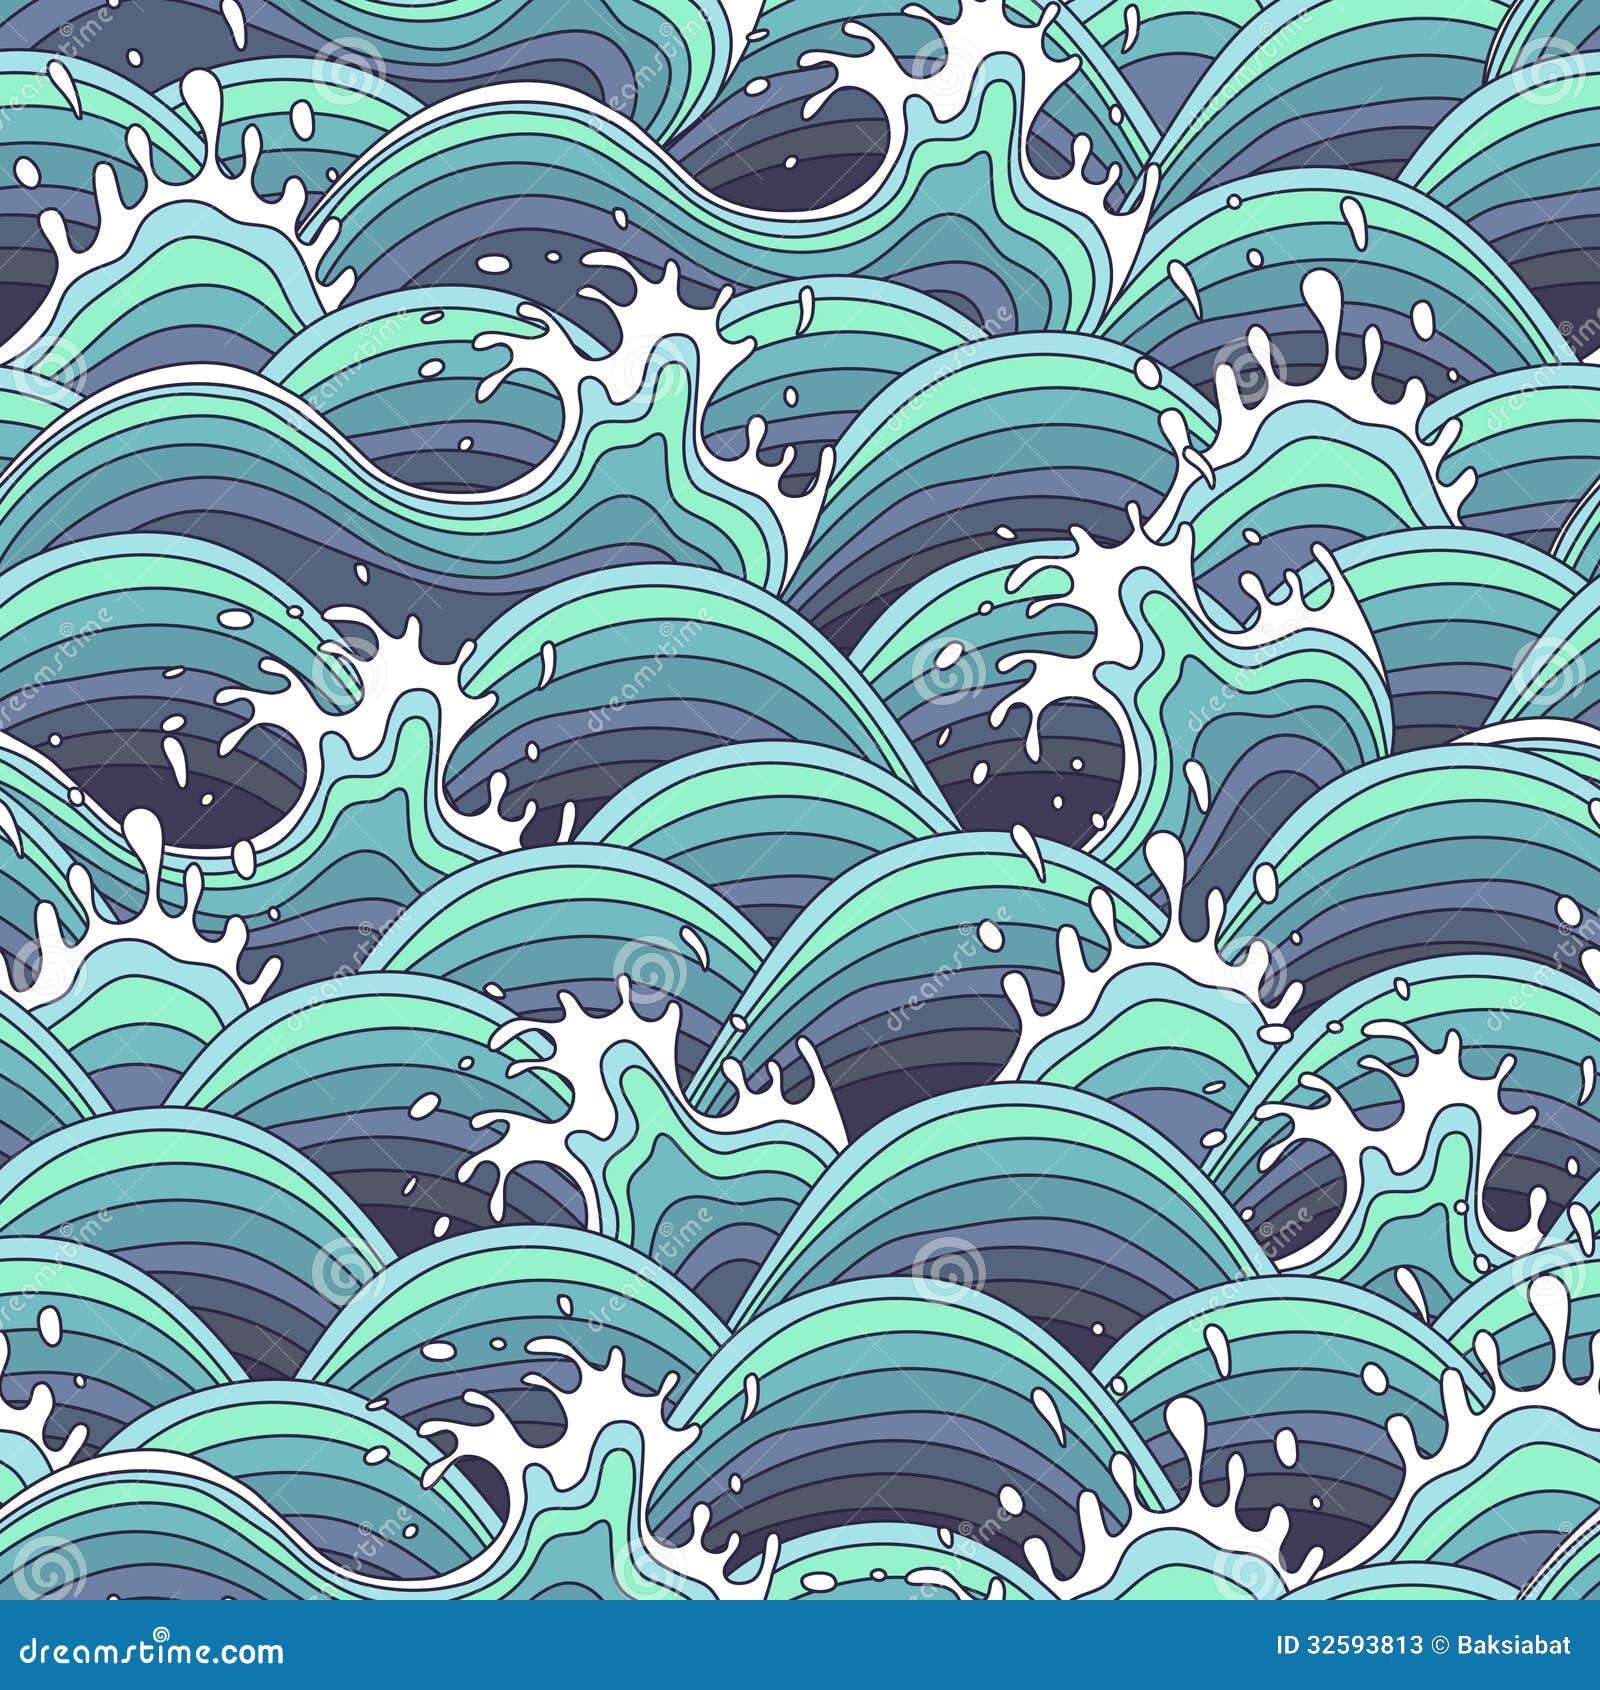 Sea Wave Background In The Decorative Style. Stock Photos - Image: 32593813